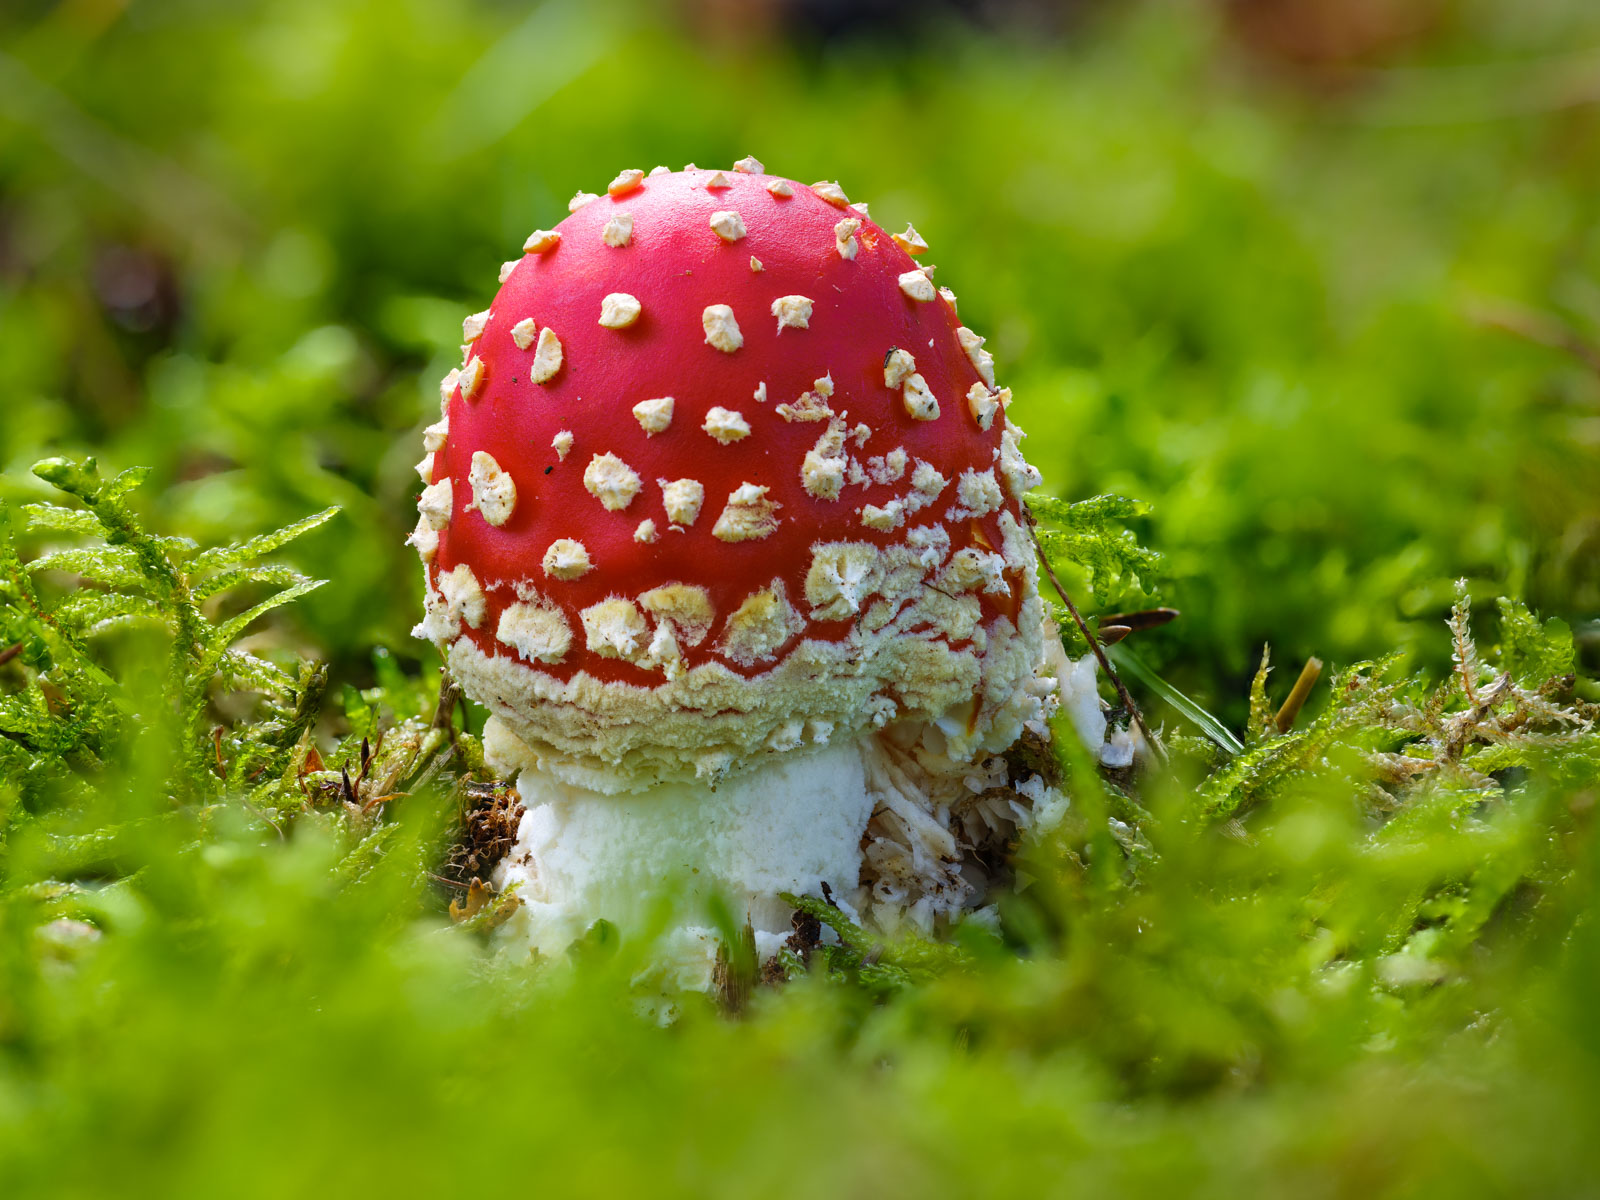 Fly agaric (Amanita muscaria) at the 'Wistinghauser Senne' in September (Oerlinghausen, Germany).